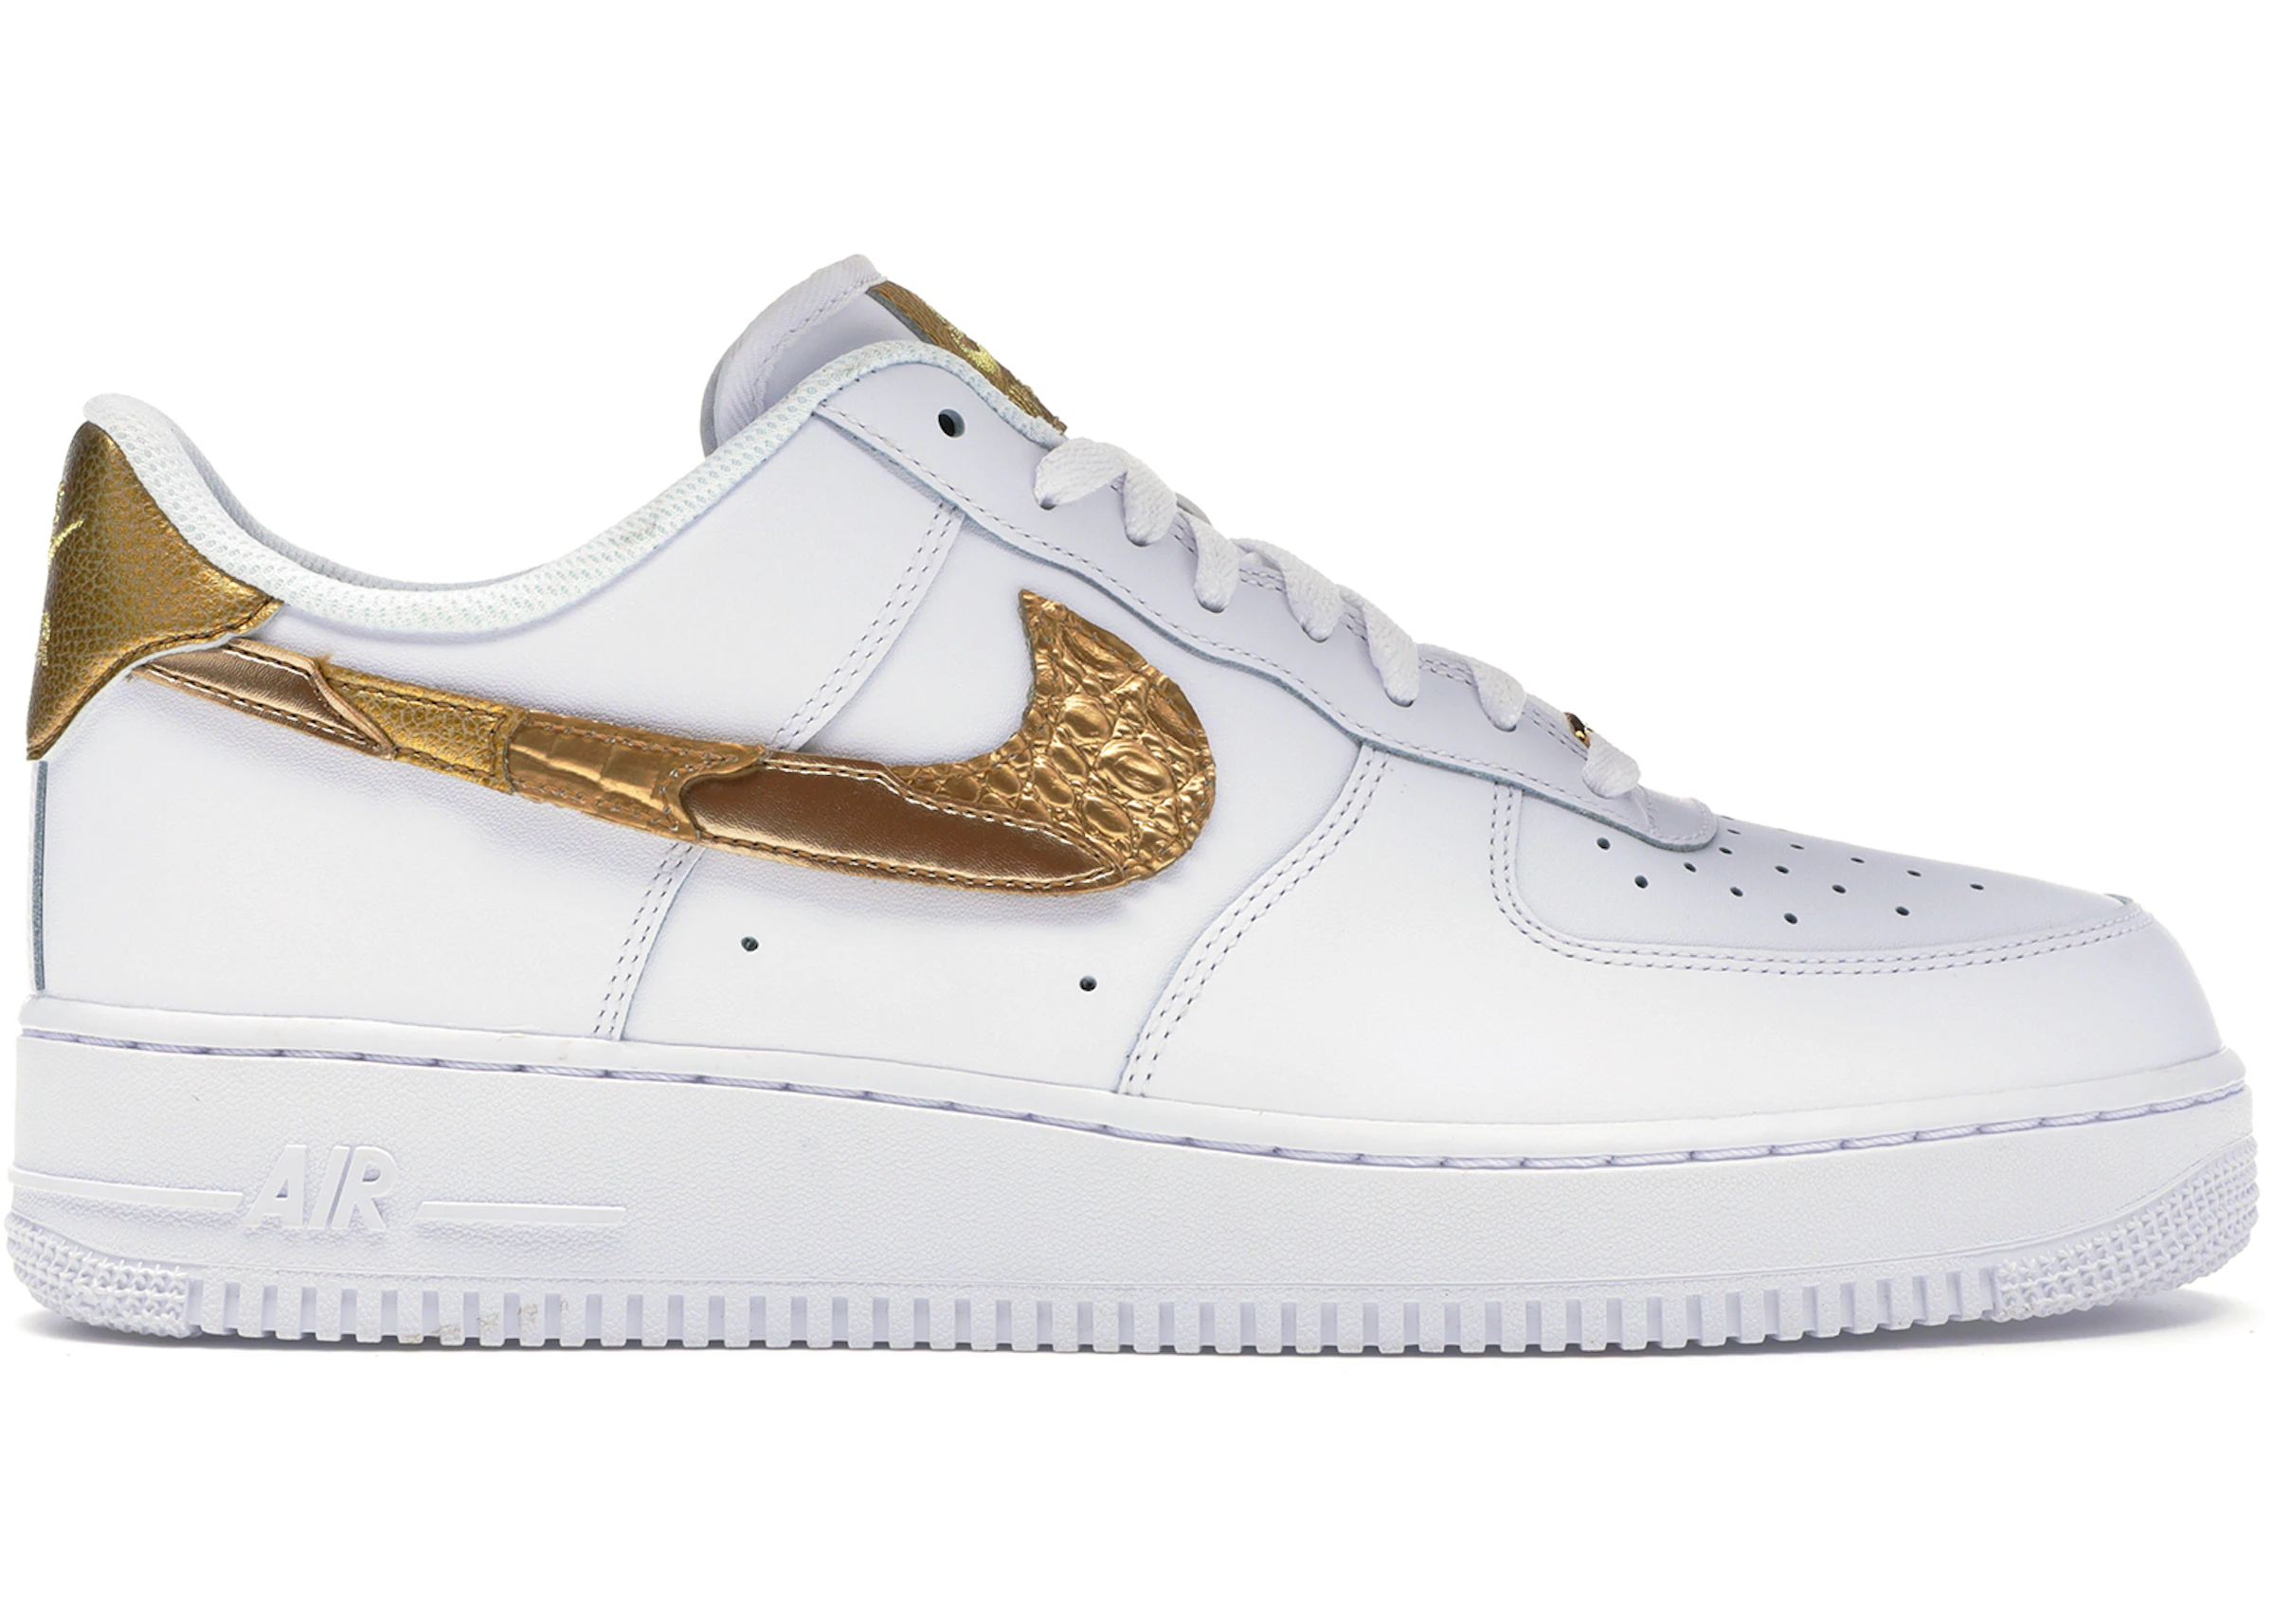 Depression exposition answer Nike Air Force 1 Low CR7 Golden Patchwork - AQ0666-100 - US